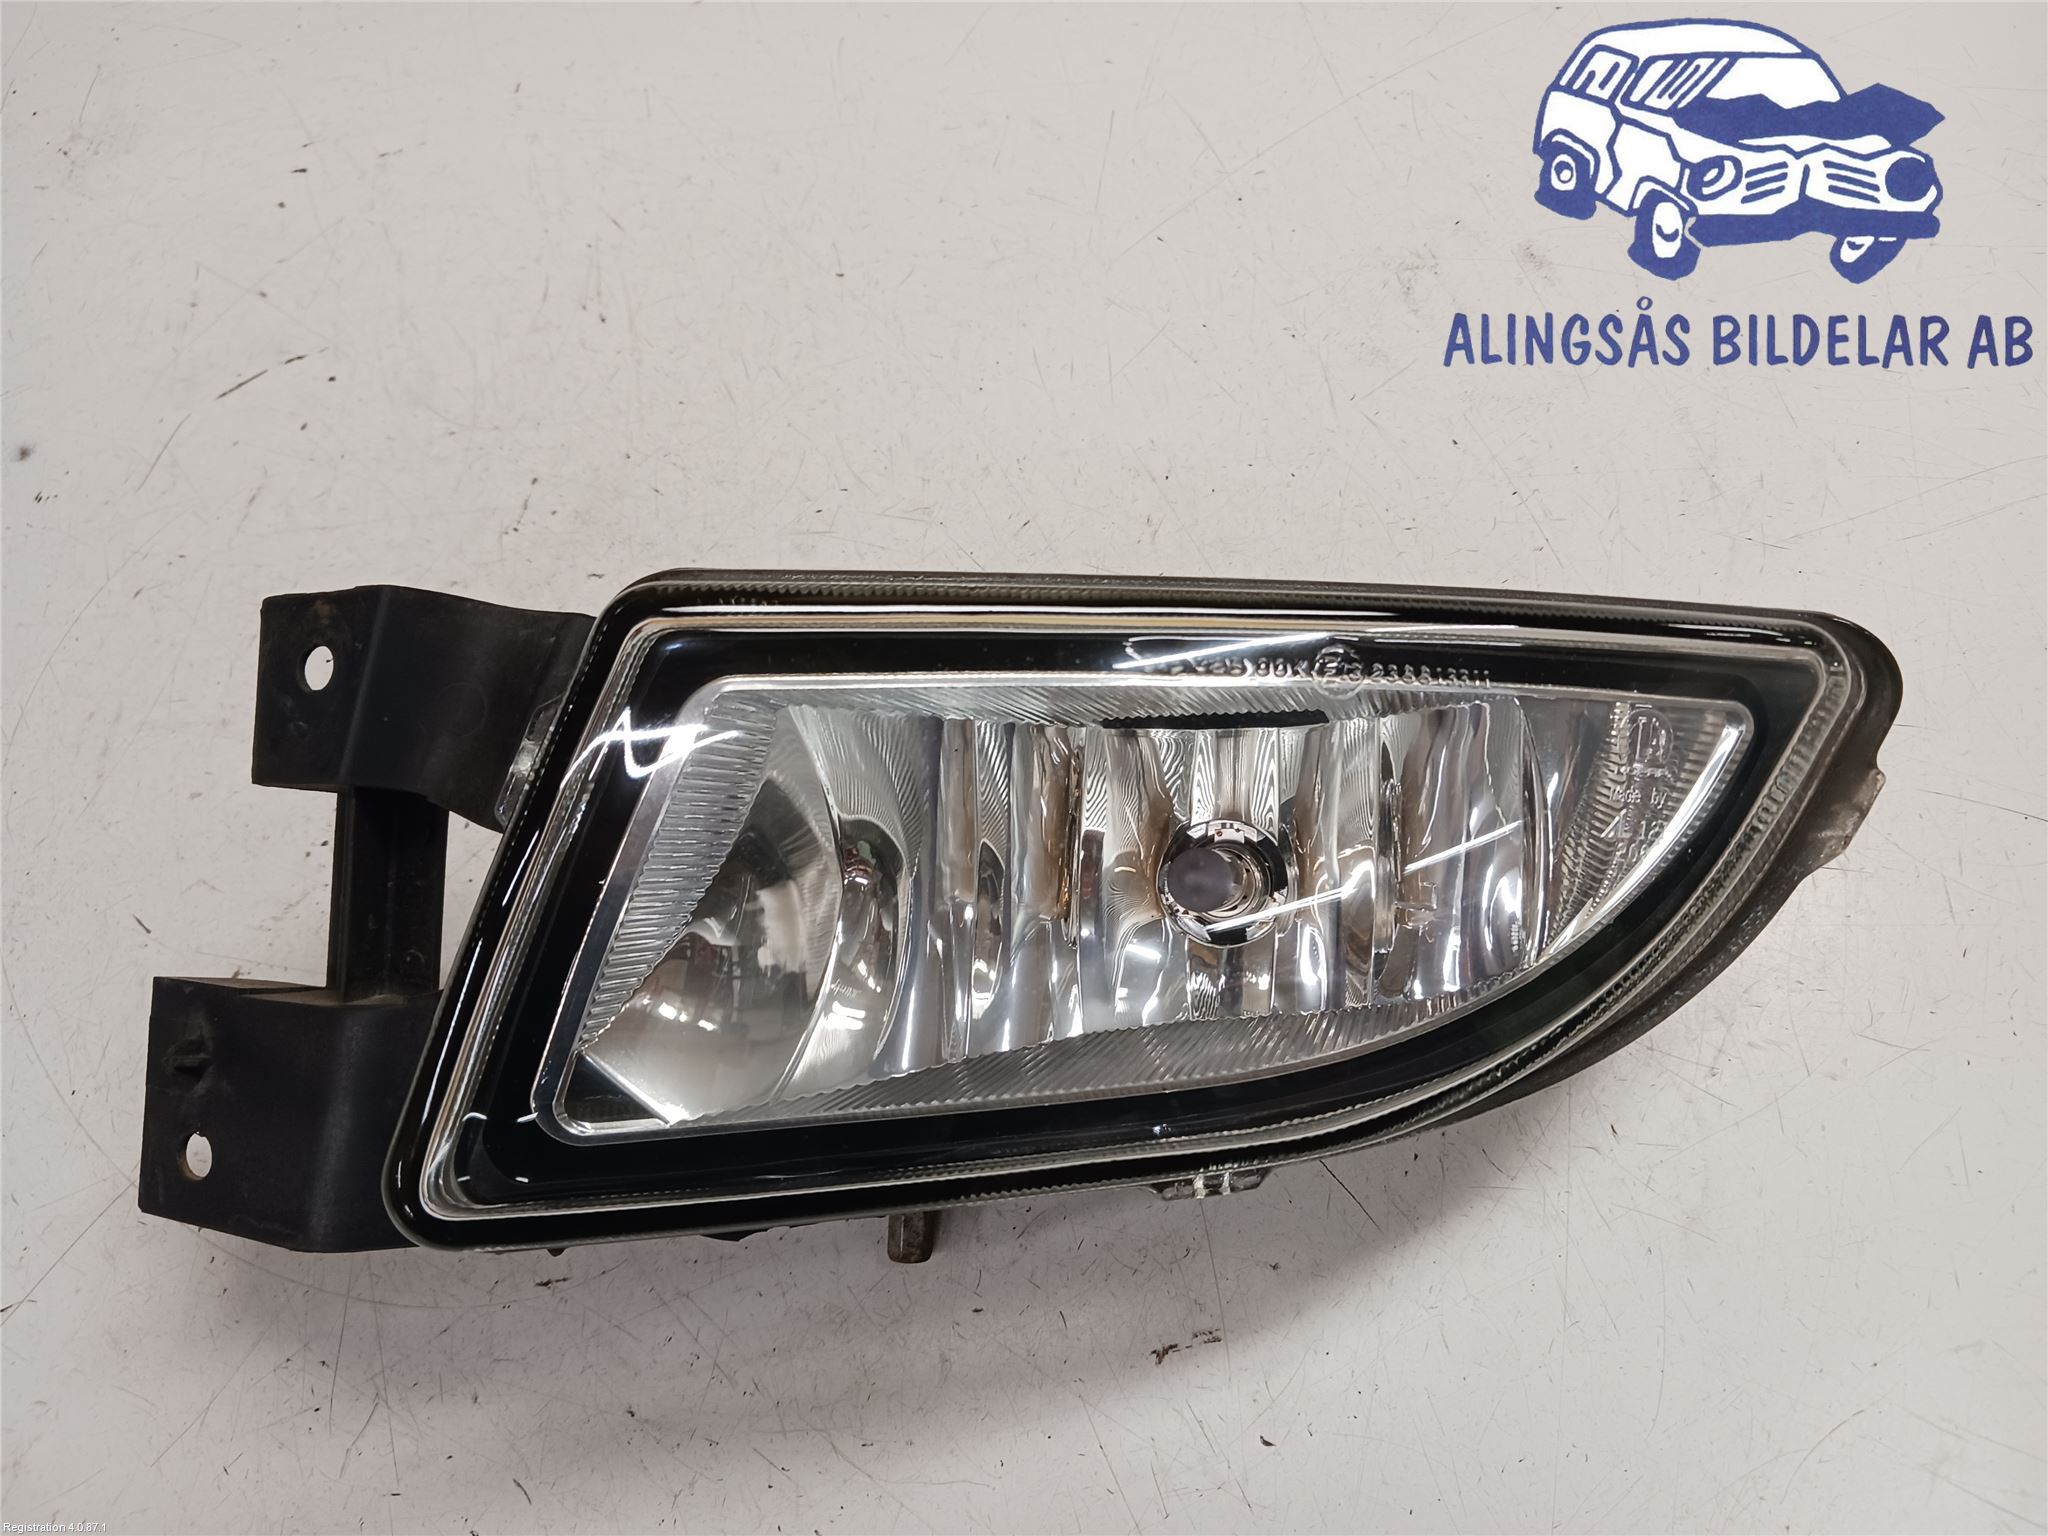 Fog lights FIAT TIPO rear and front cheap online ❱❱❱ buy in